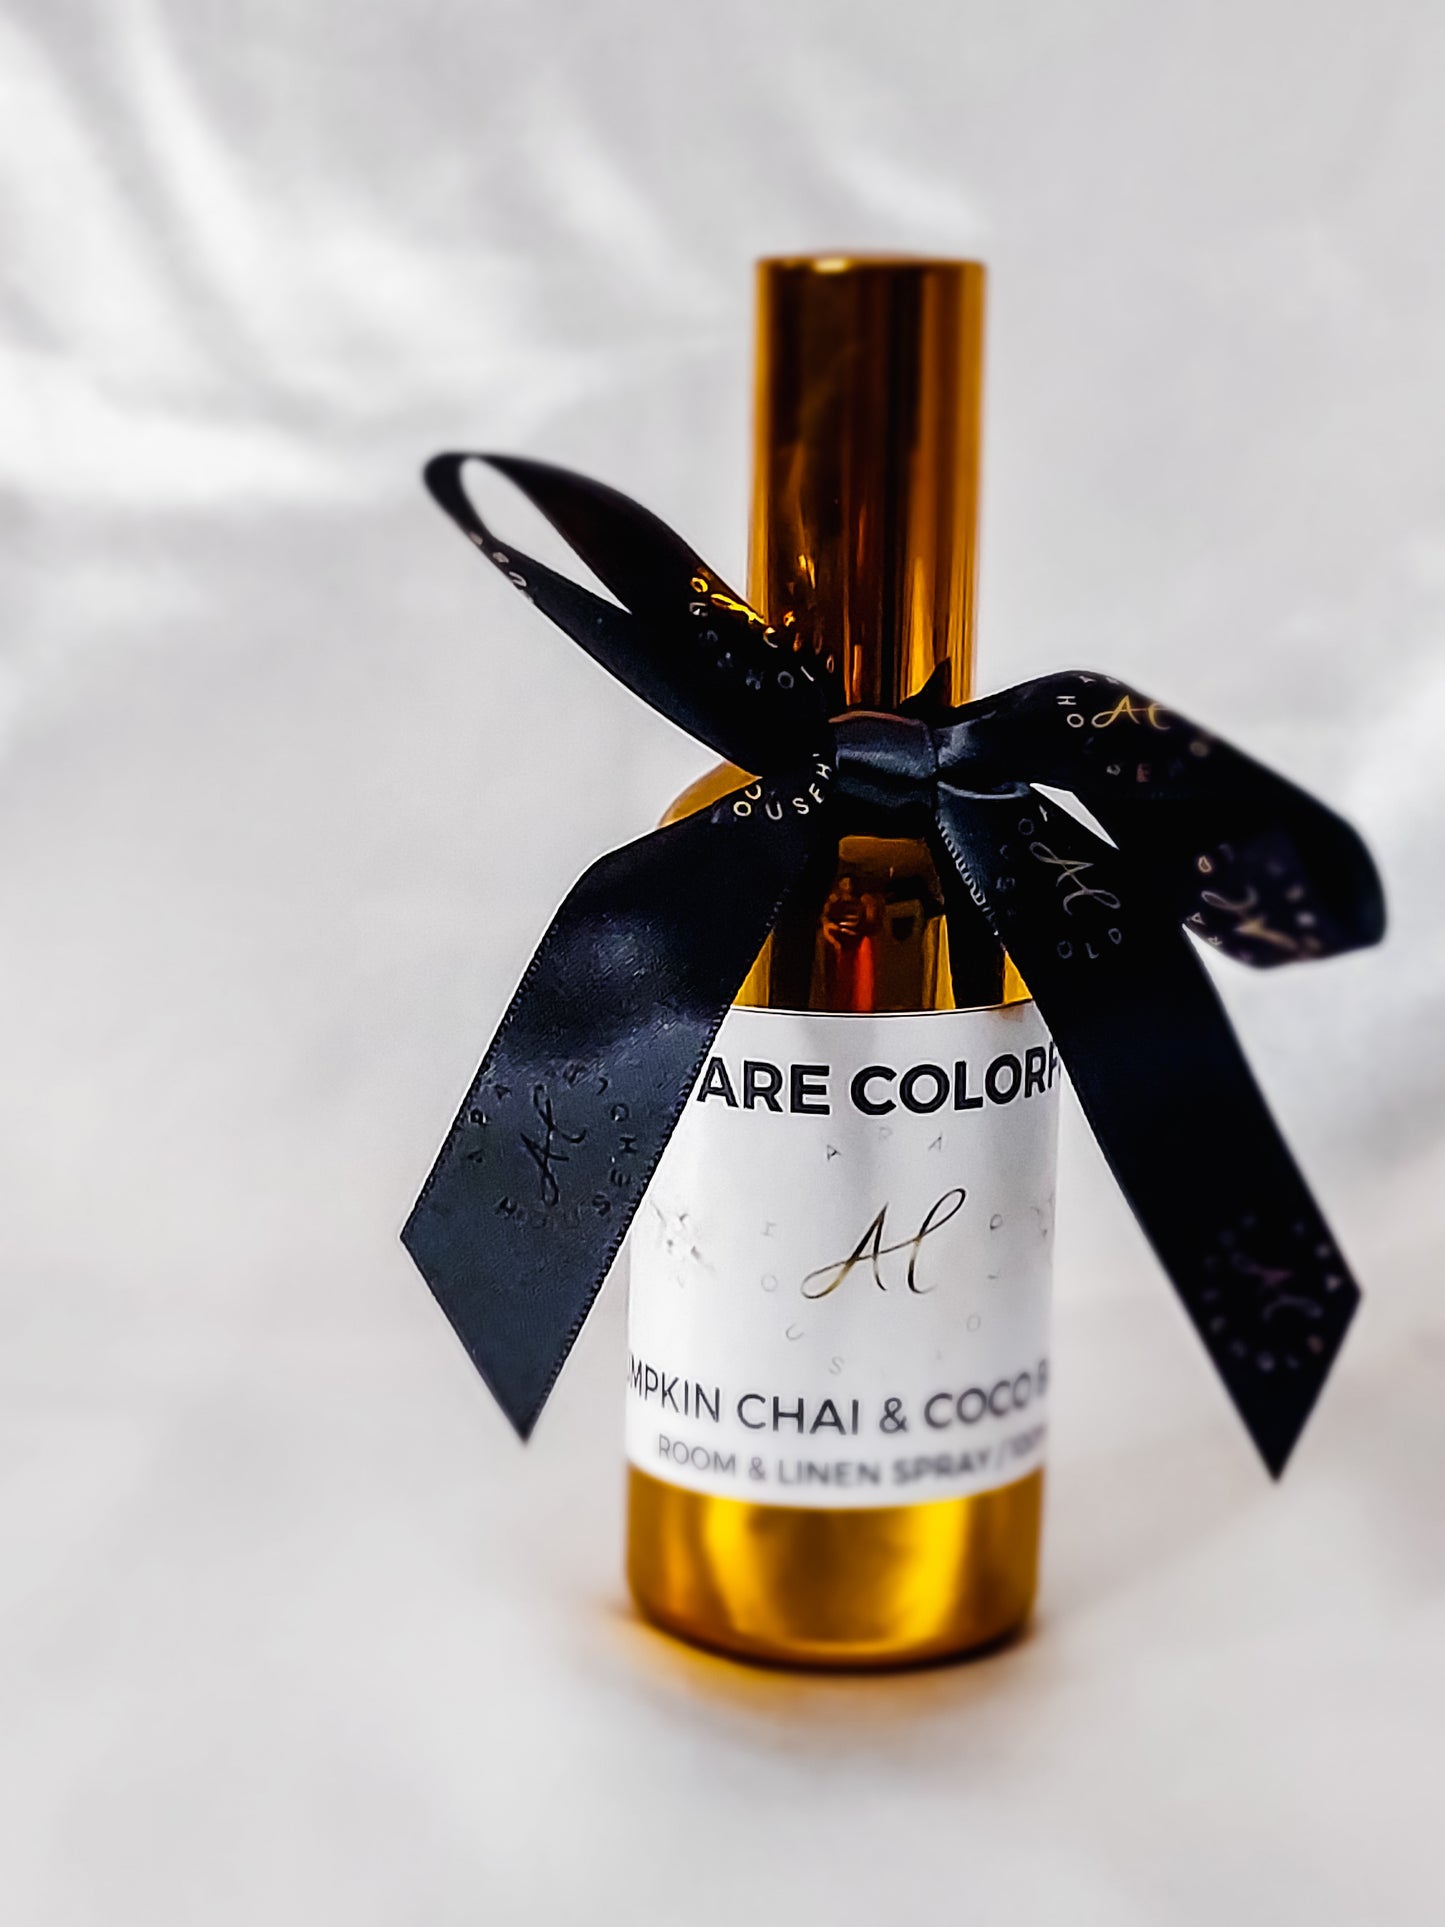 You are Colorful Luxury Room & Linen Spray